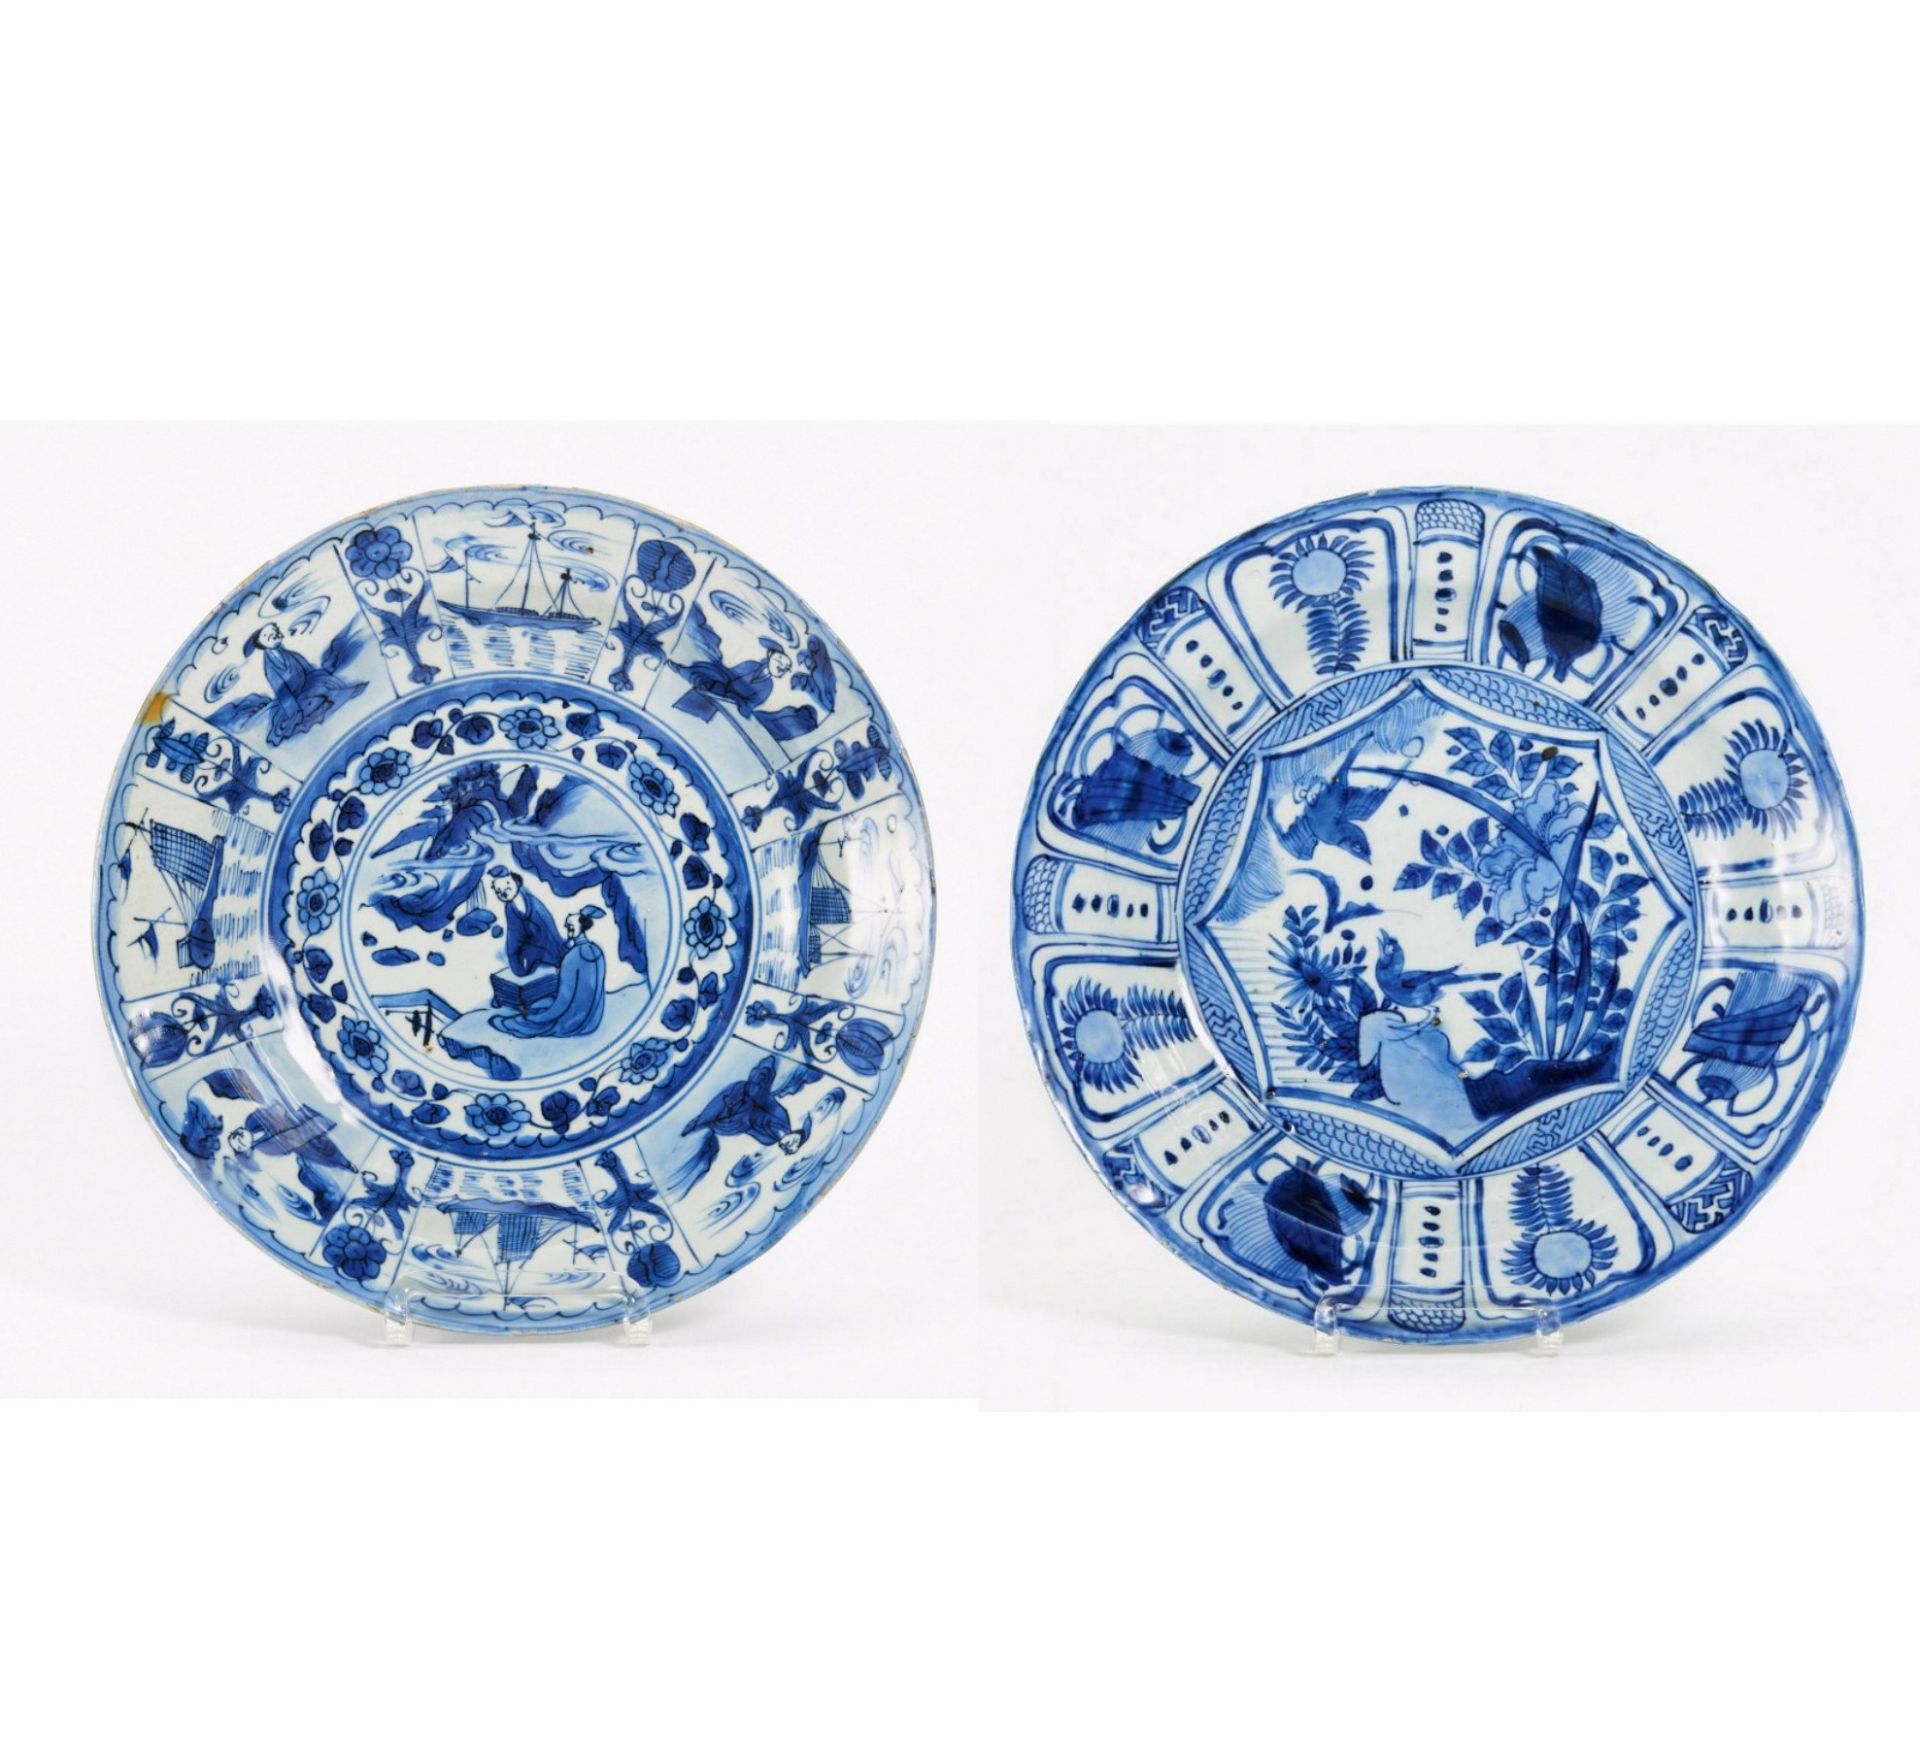 TWO KRAAK DISHES WITH SCHOLARS RESP. SINGING BIRDS AND PEONY. China. Ming dynasty. 17th c. Porcelain